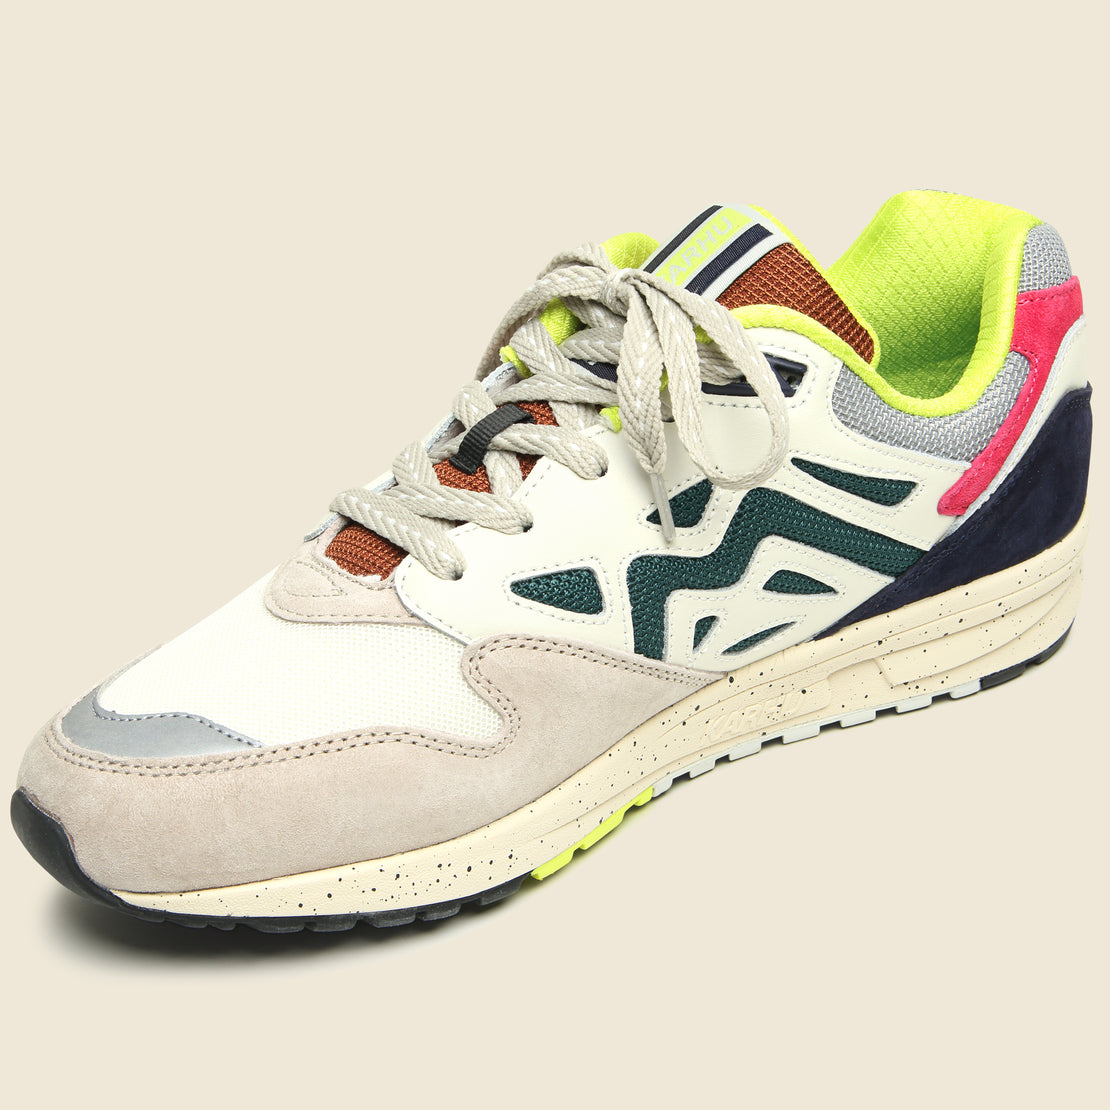 Legacy 96 Sneaker - Silver Lining/June Bug - Karhu - STAG Provisions - Shoes - Athletic